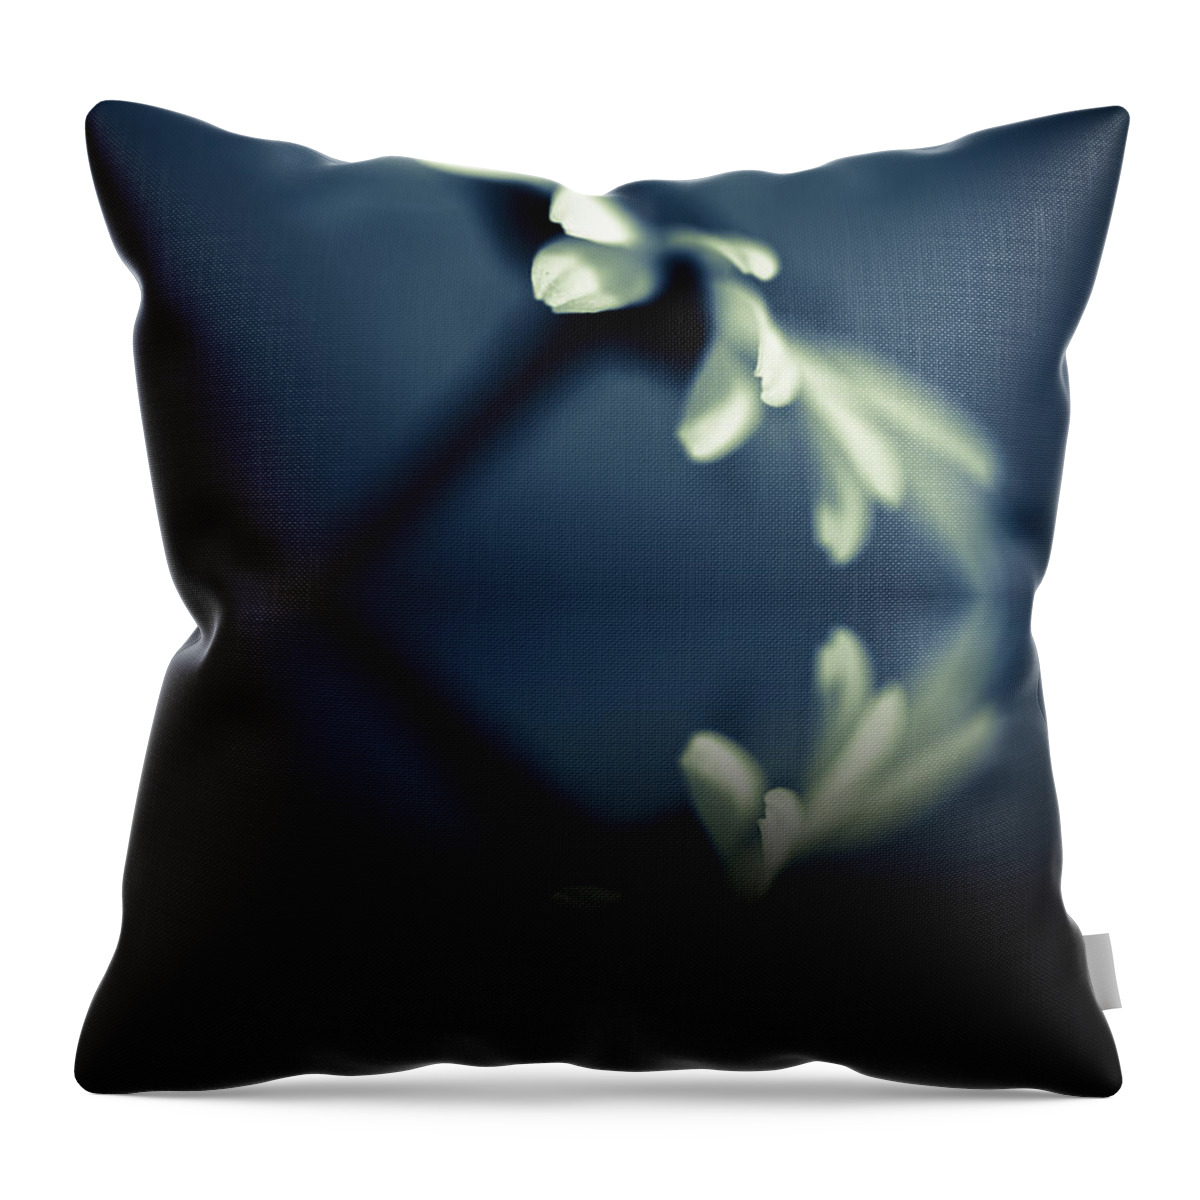 Flower Throw Pillow featuring the photograph Touch Of Blue by Shane Holsclaw